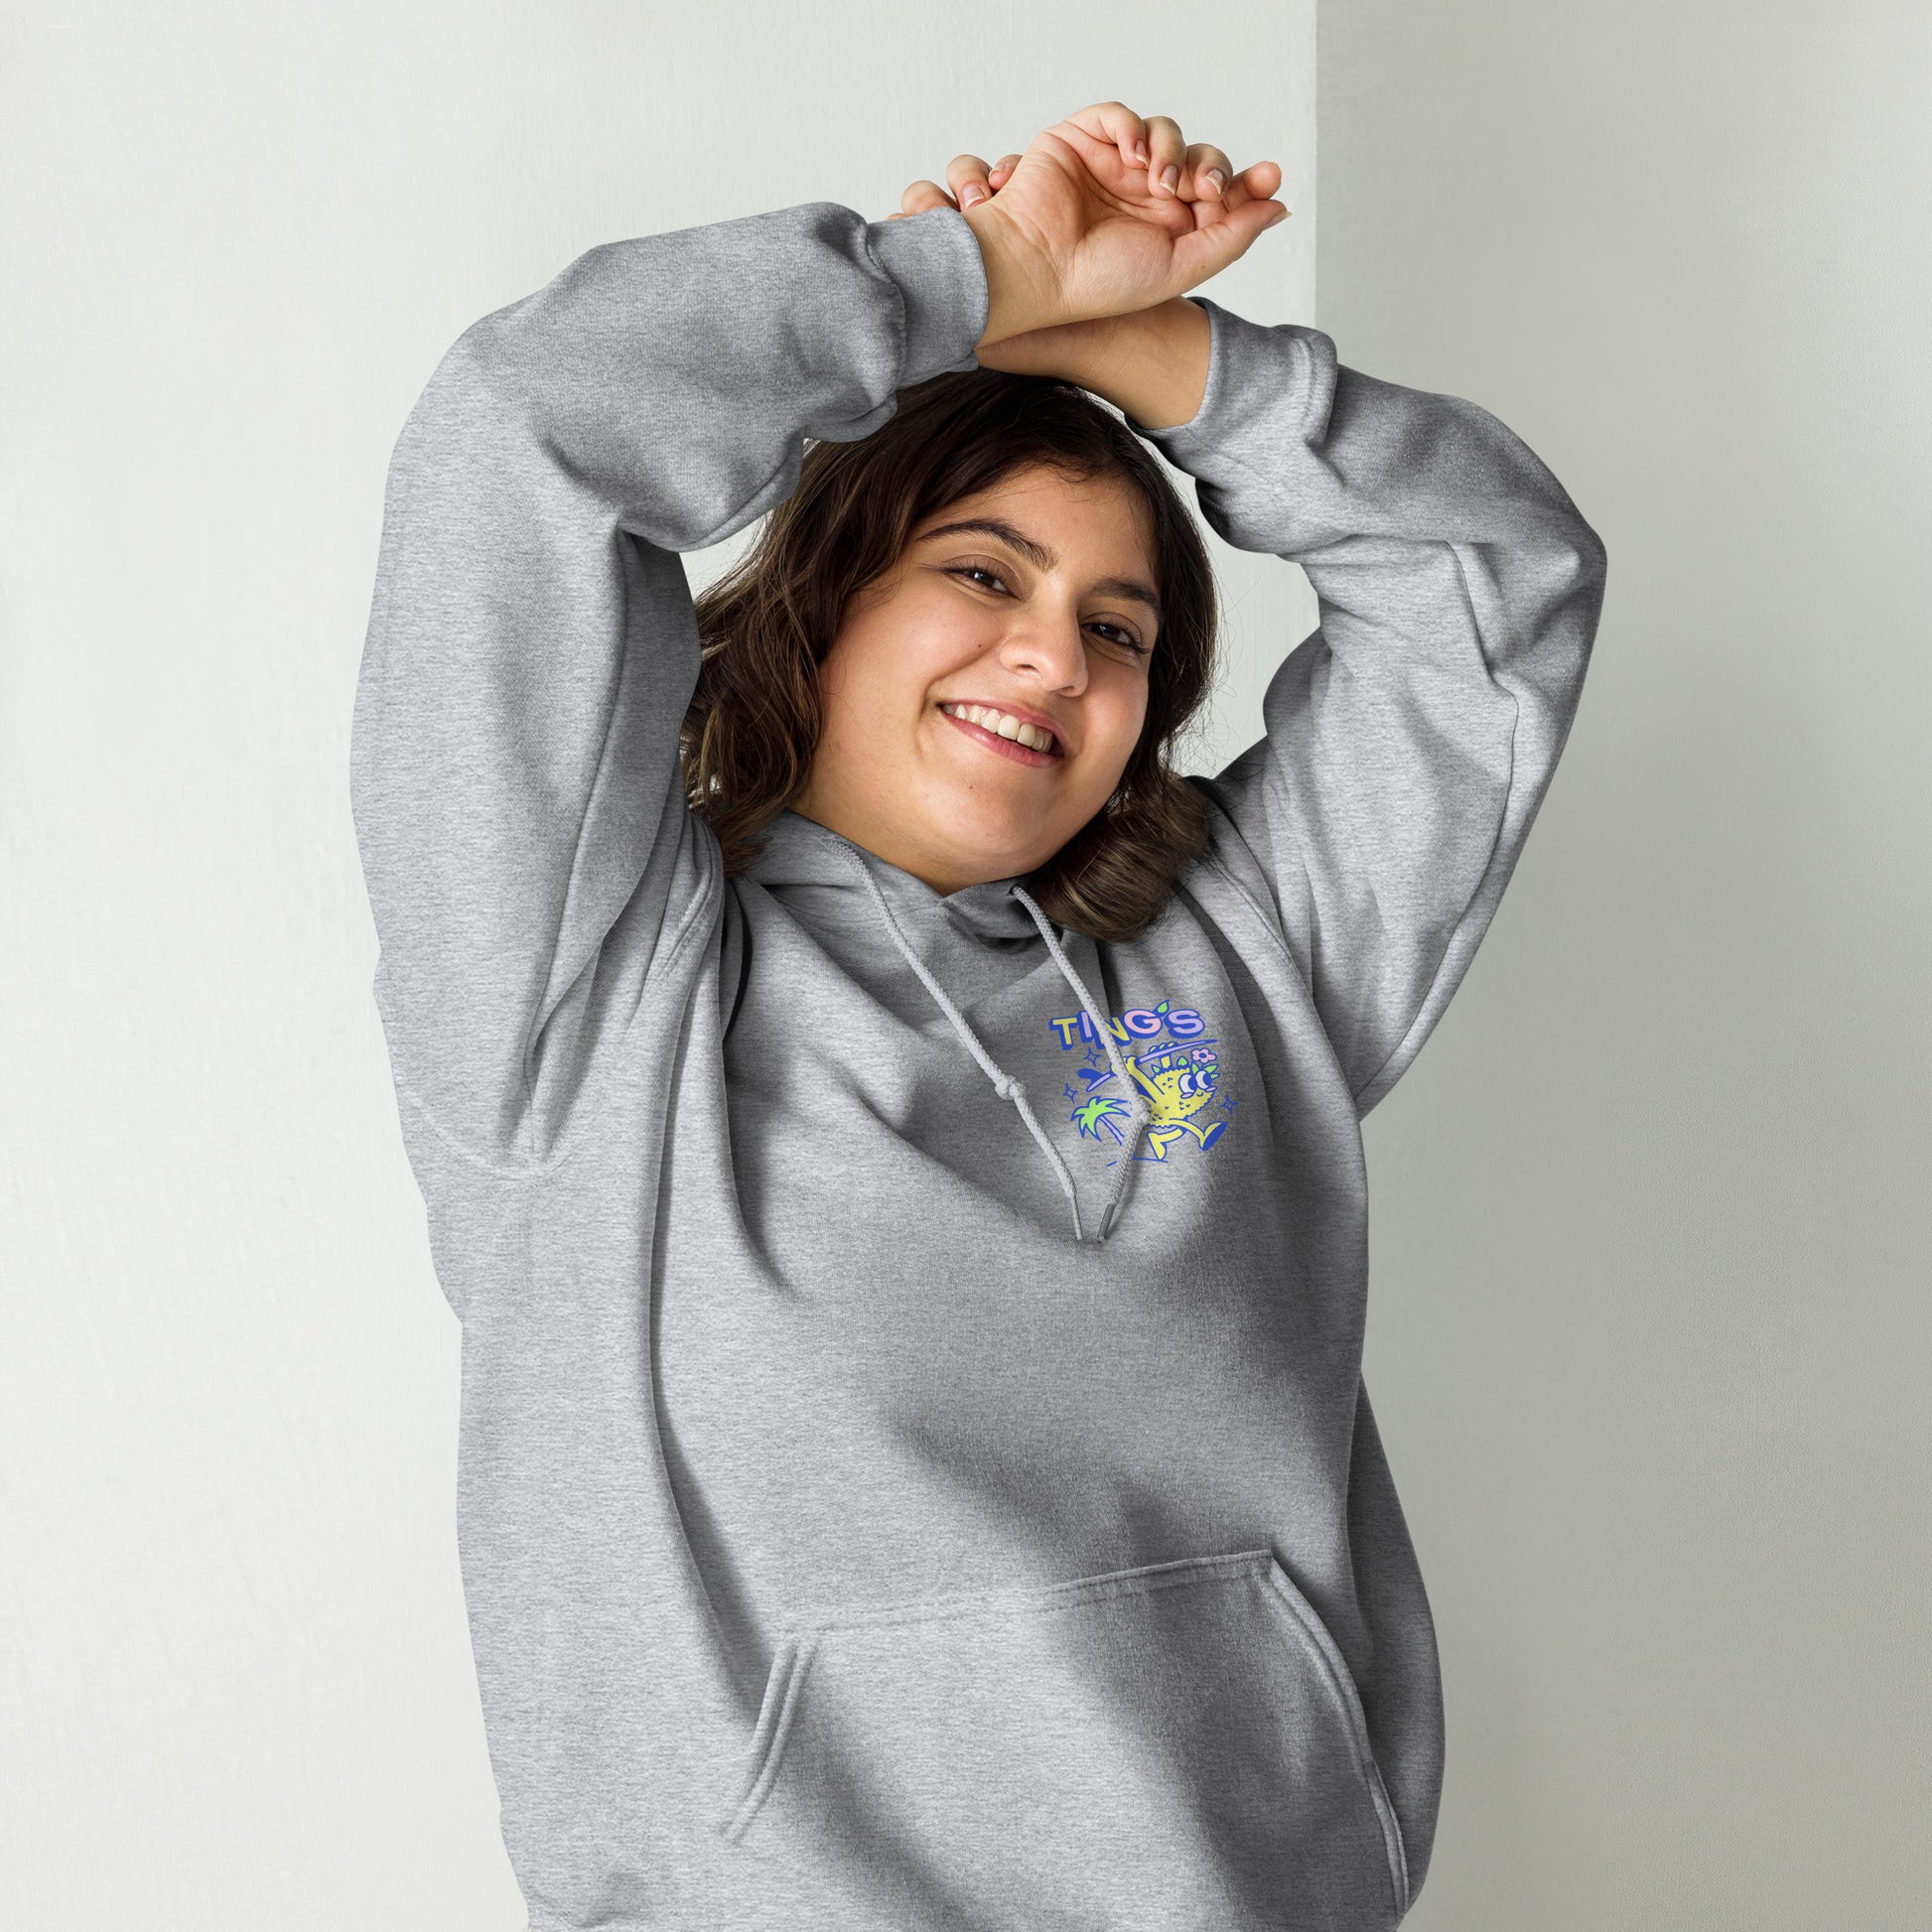 Female model wearing Ting's heather grey unisex hoodie with Ting's logo on front